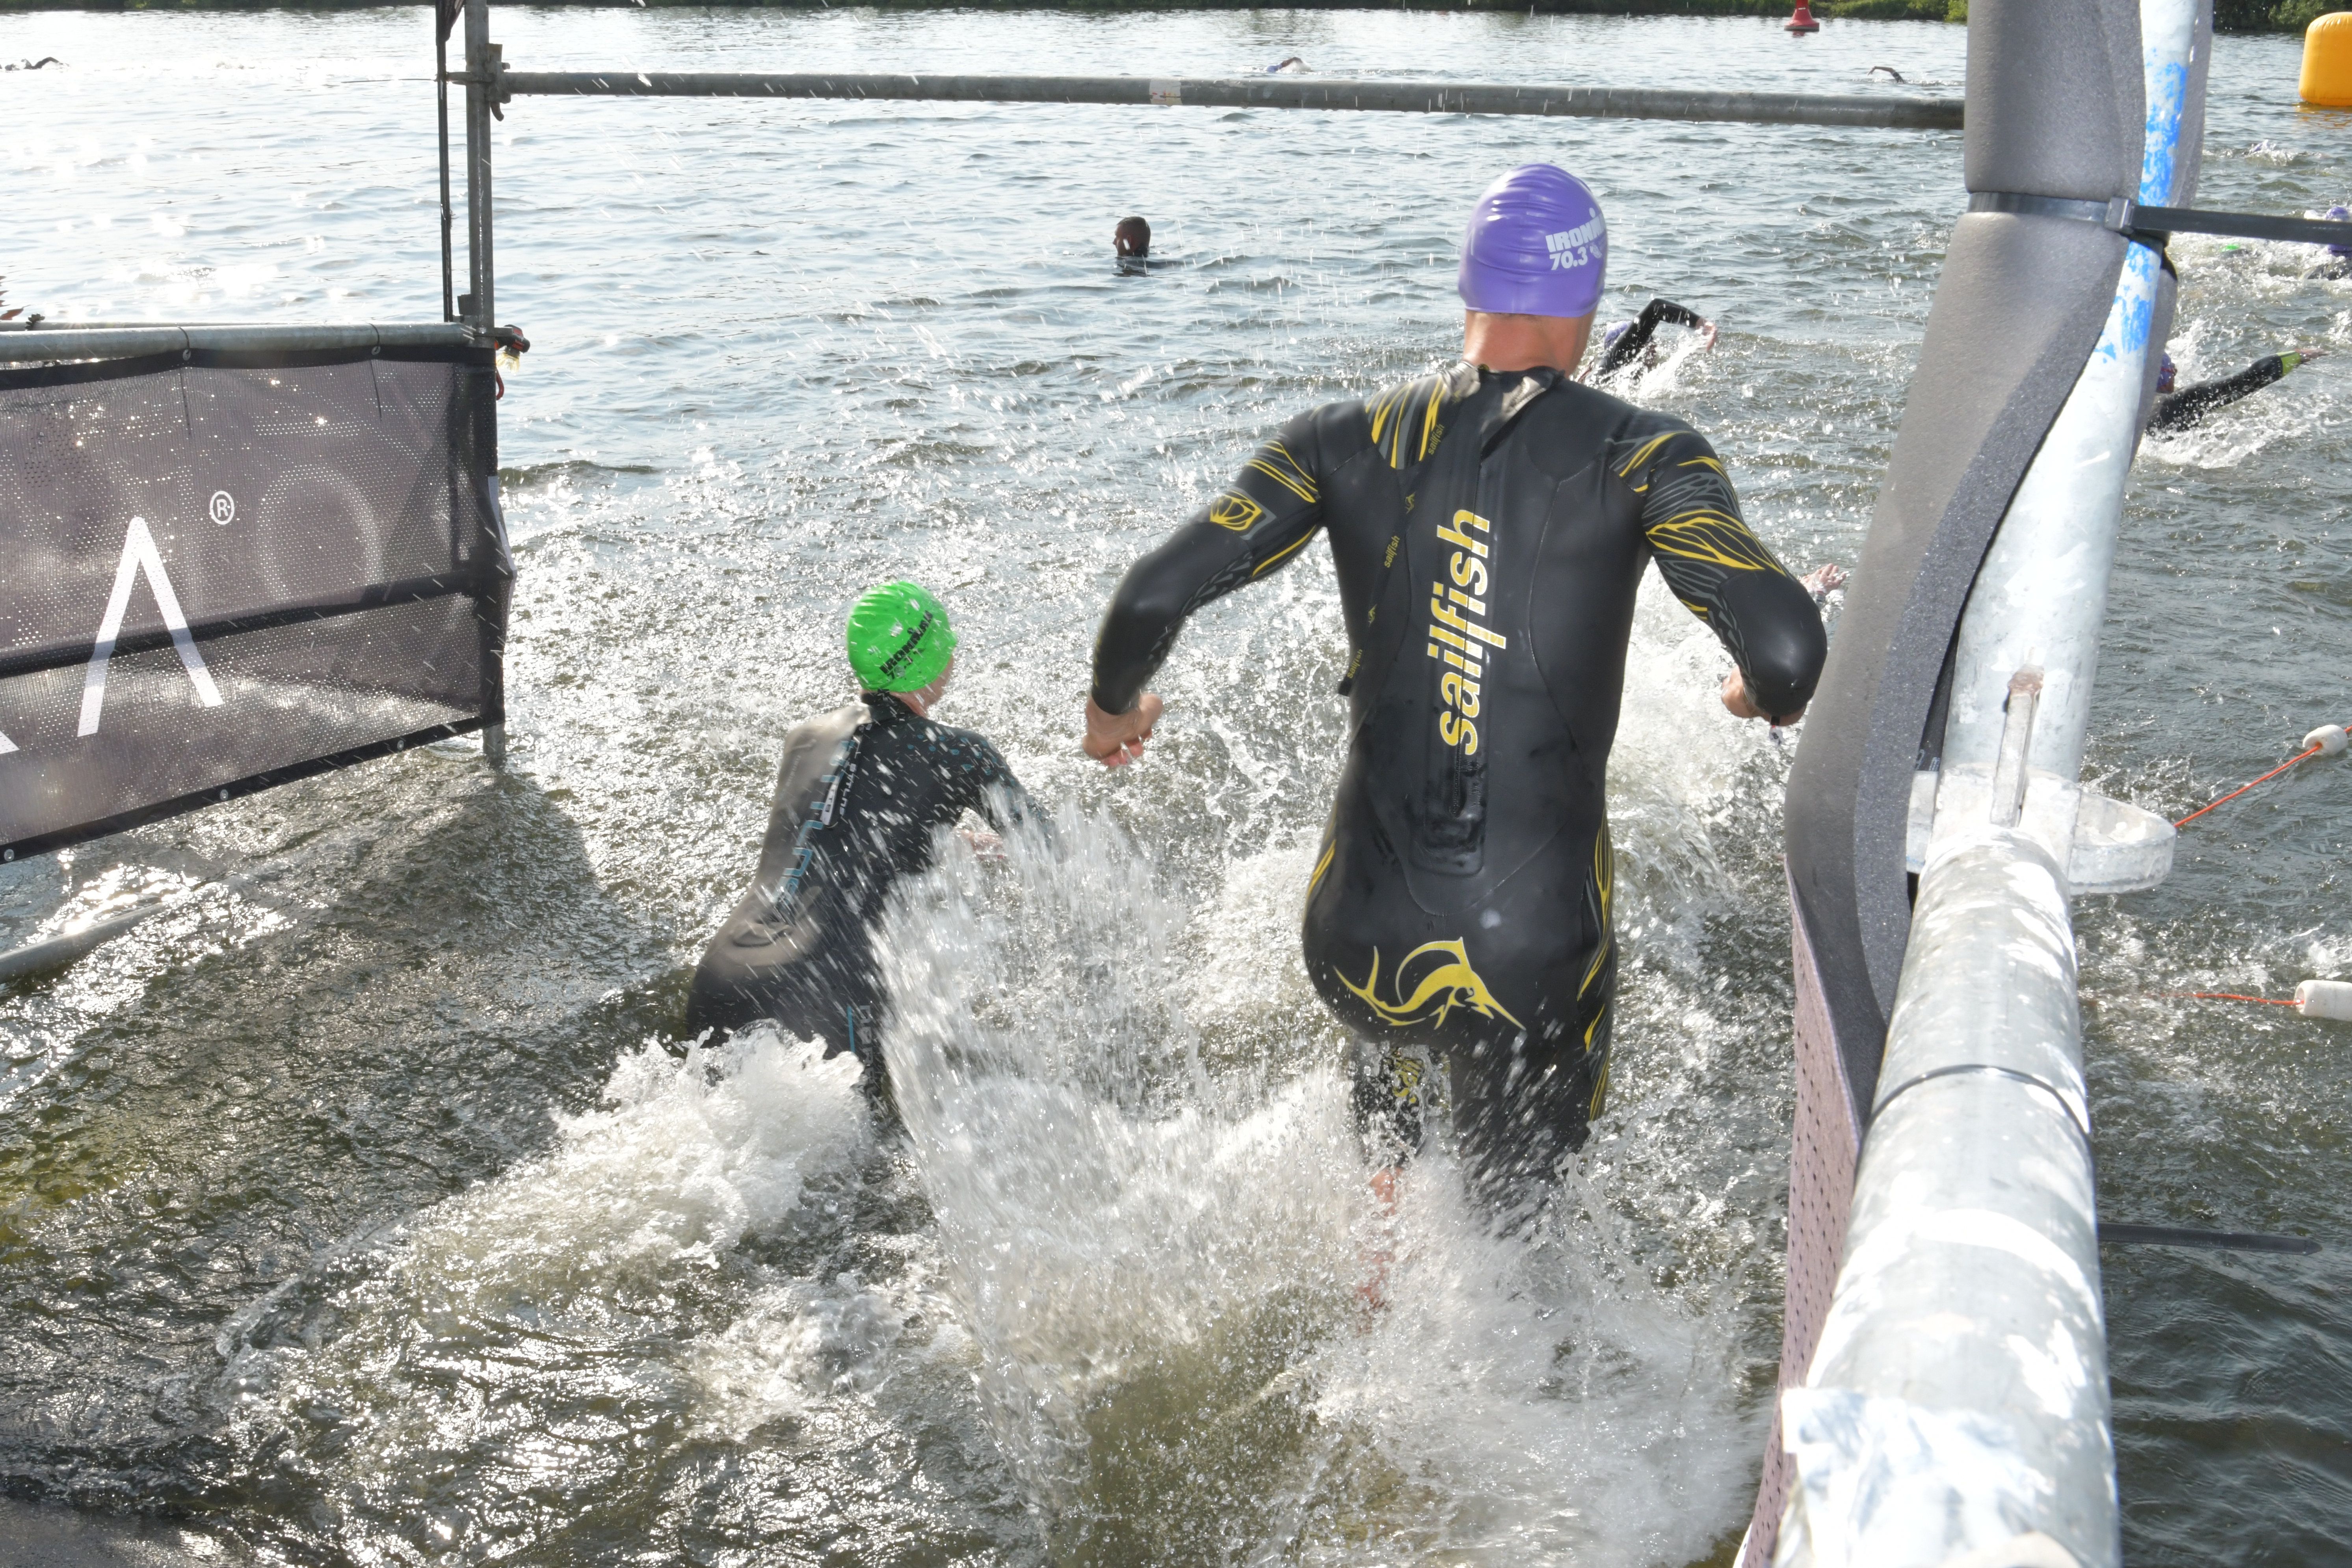 IRONMAN 70.3 Luxembourg - Remich Région Moselle